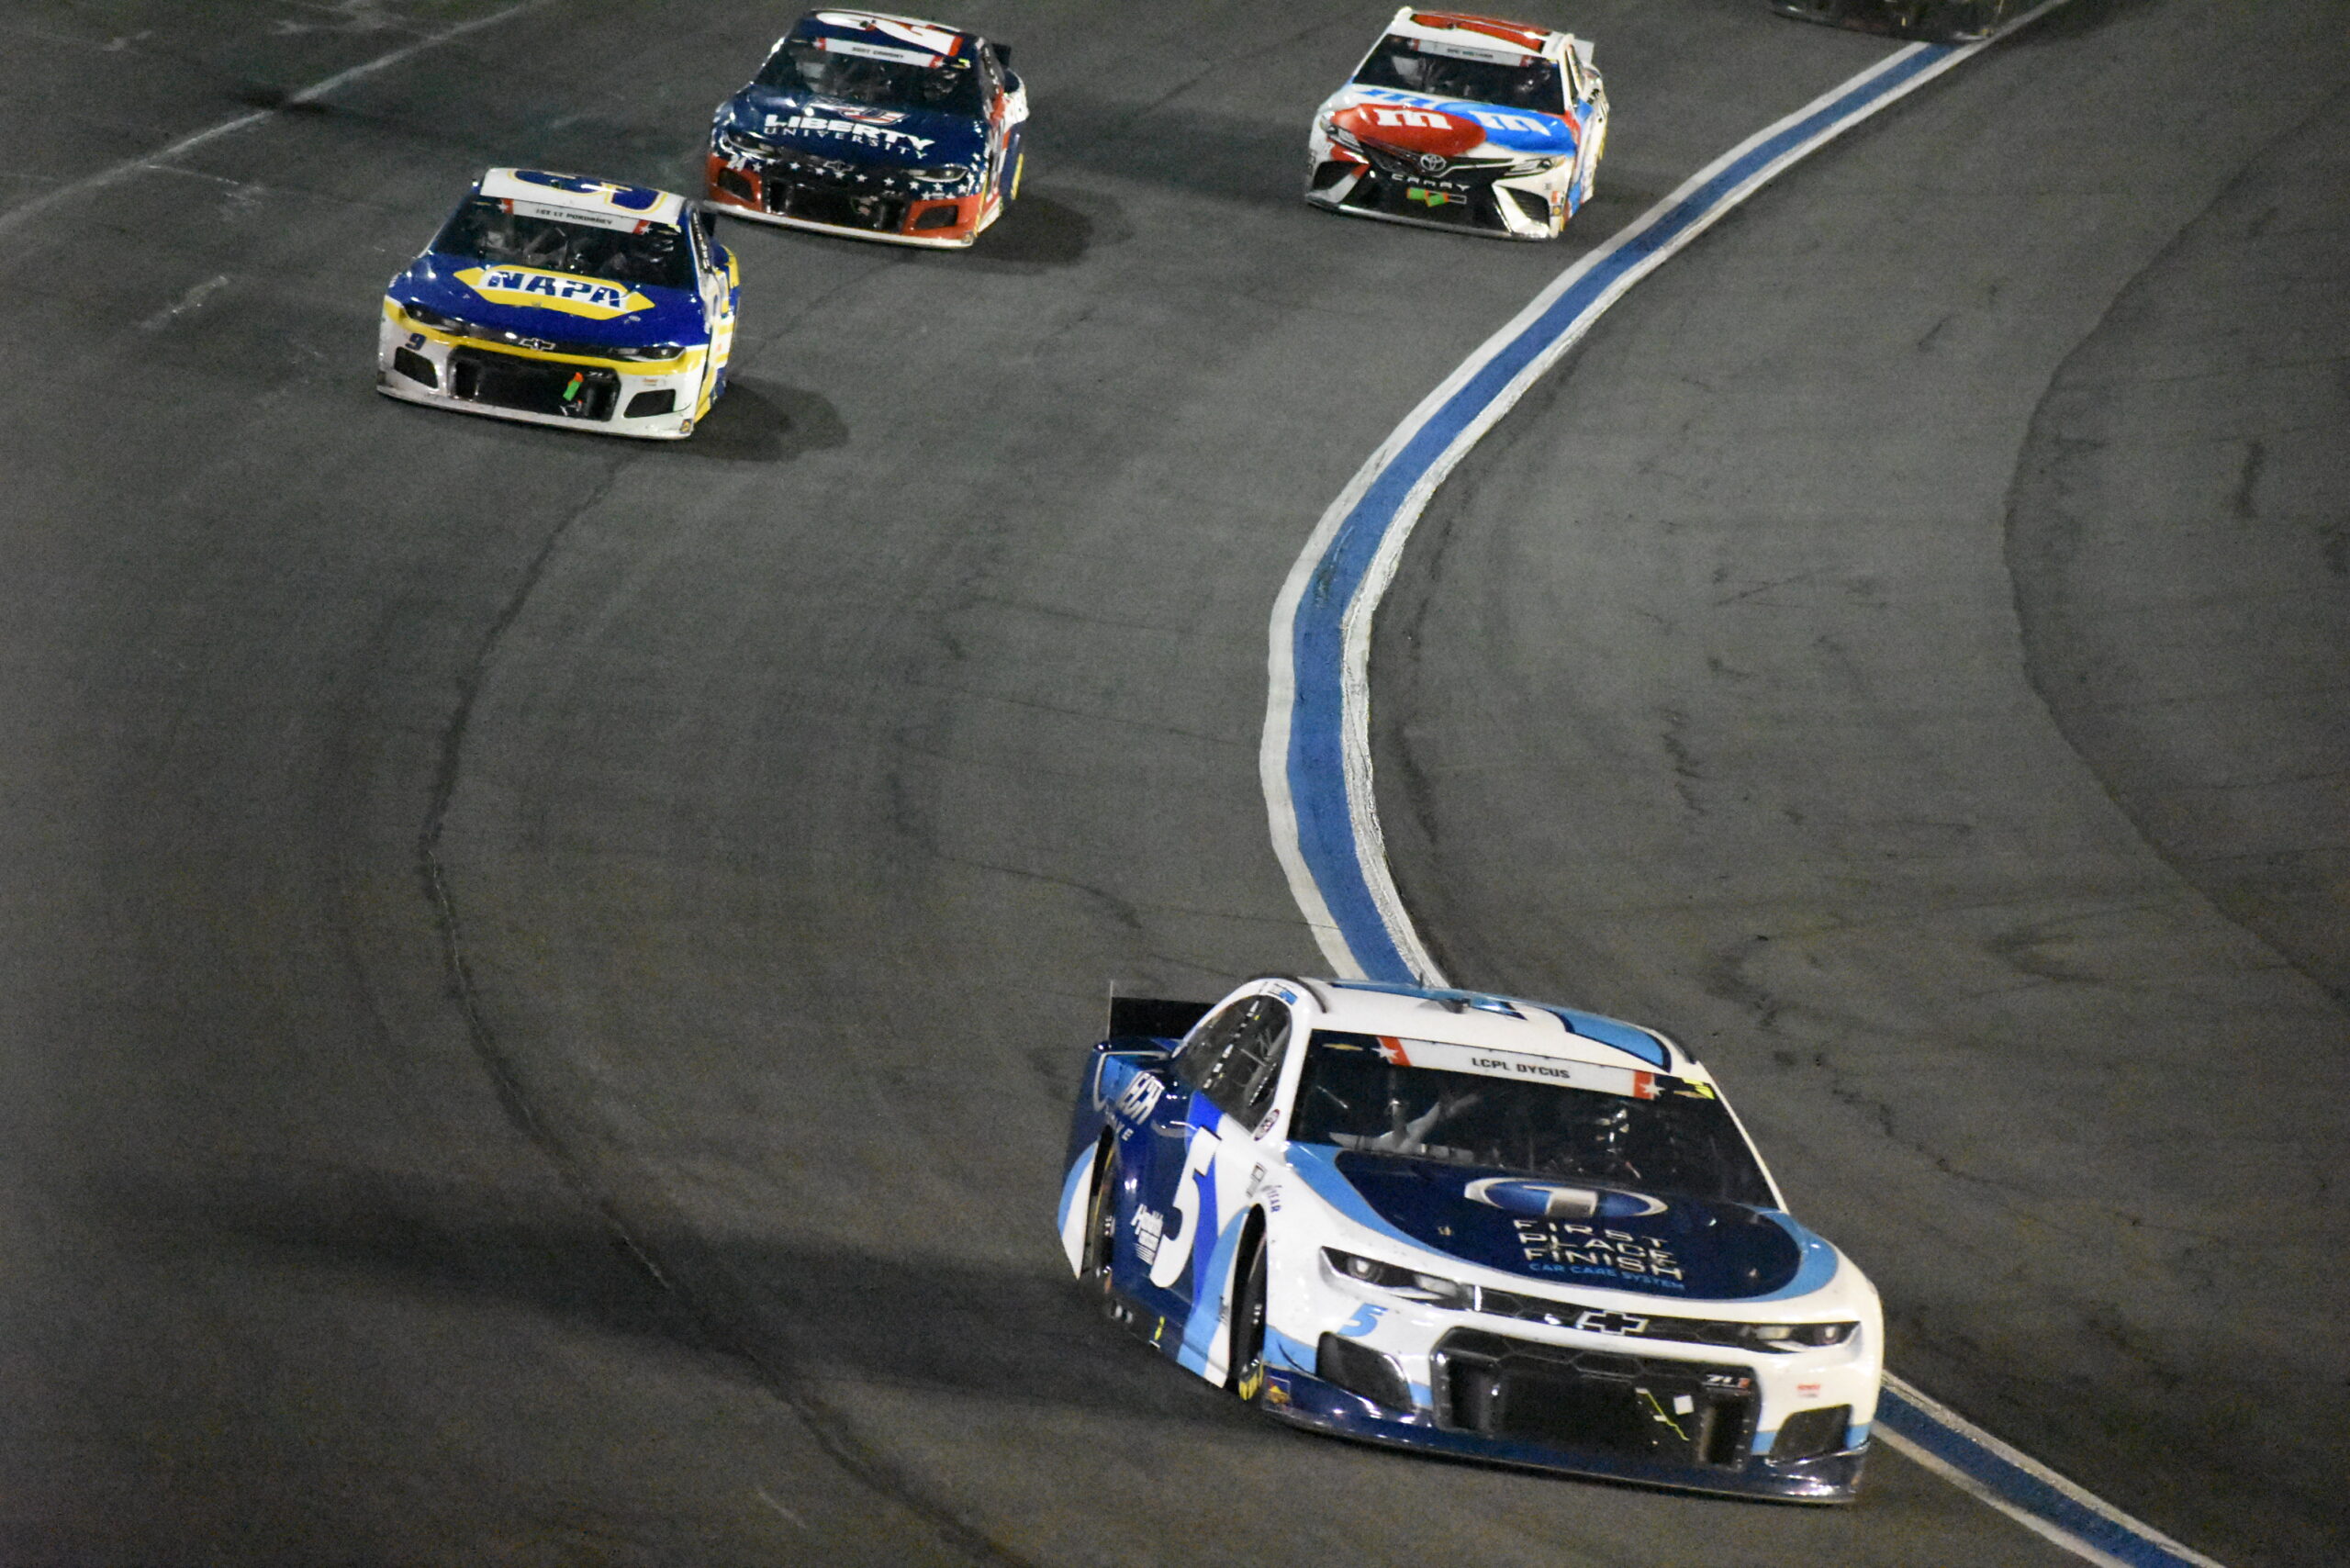 Most importantly, Larson understands the ebbs and flows of NASCAR. (Photo: Michael Guariglia/The Podium Finish)